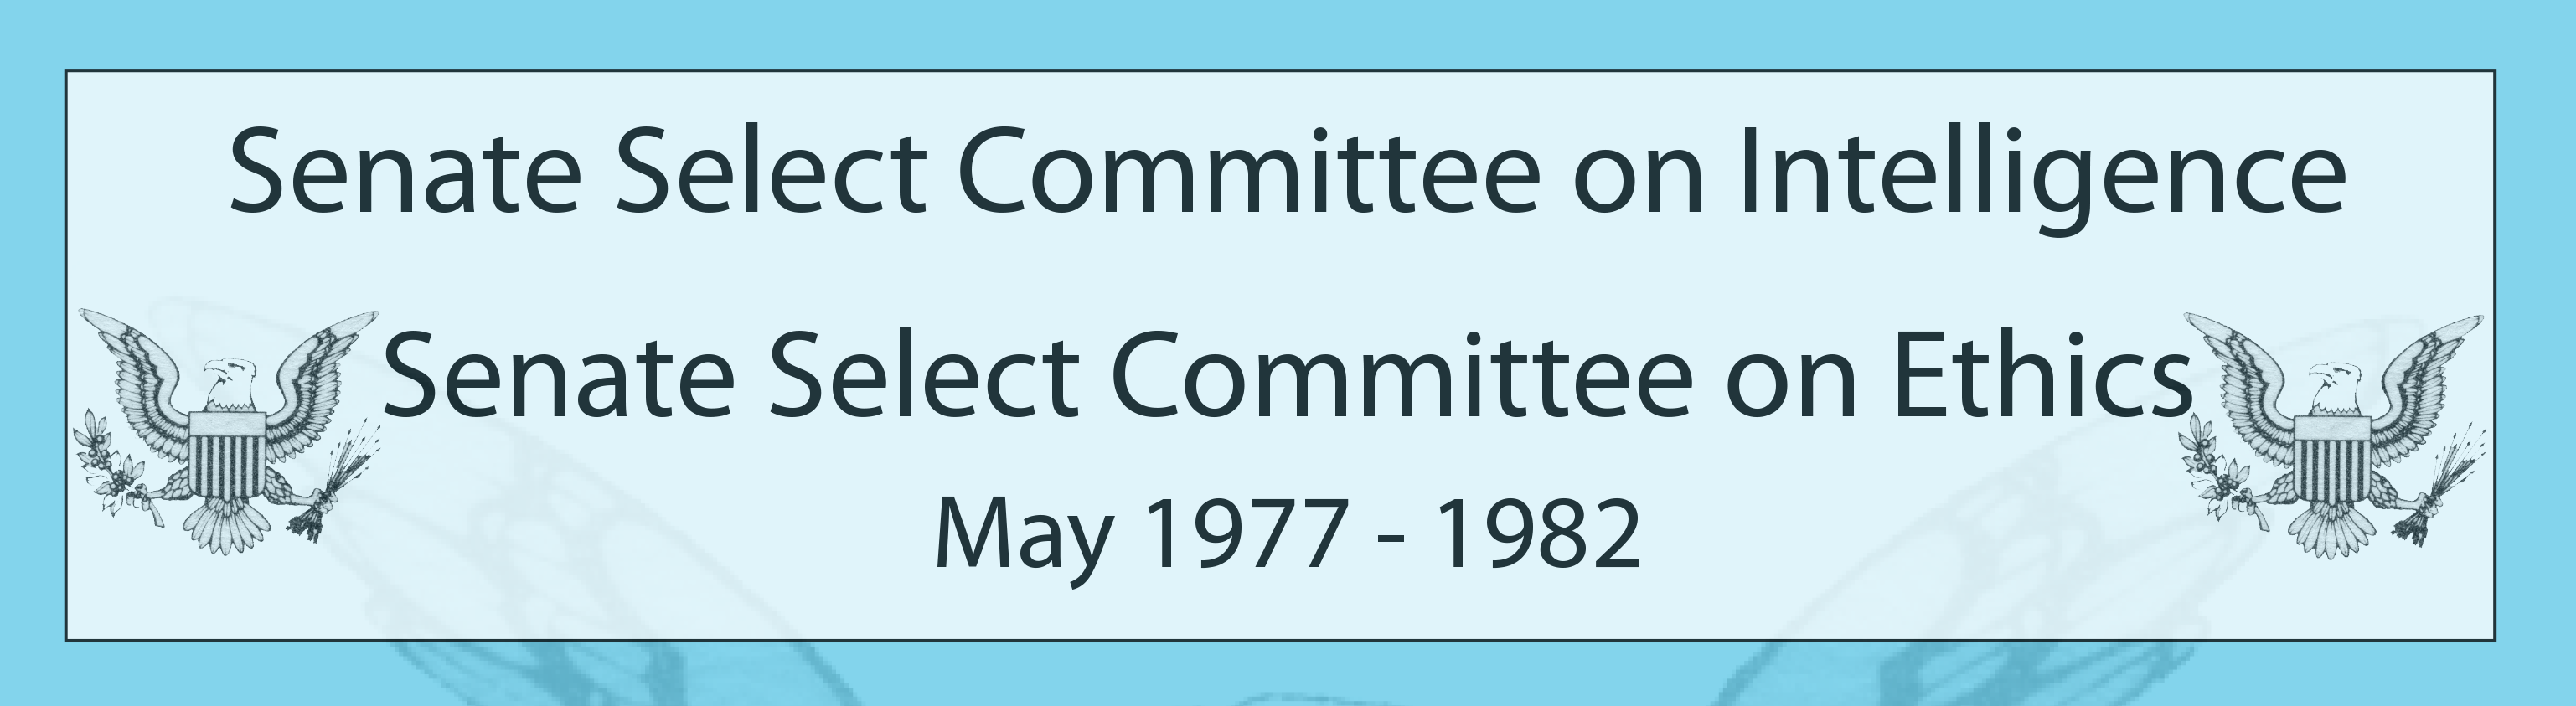 Senate Select Committee on Intelligence and Senate Select Committee on Ethics years 1977-1982